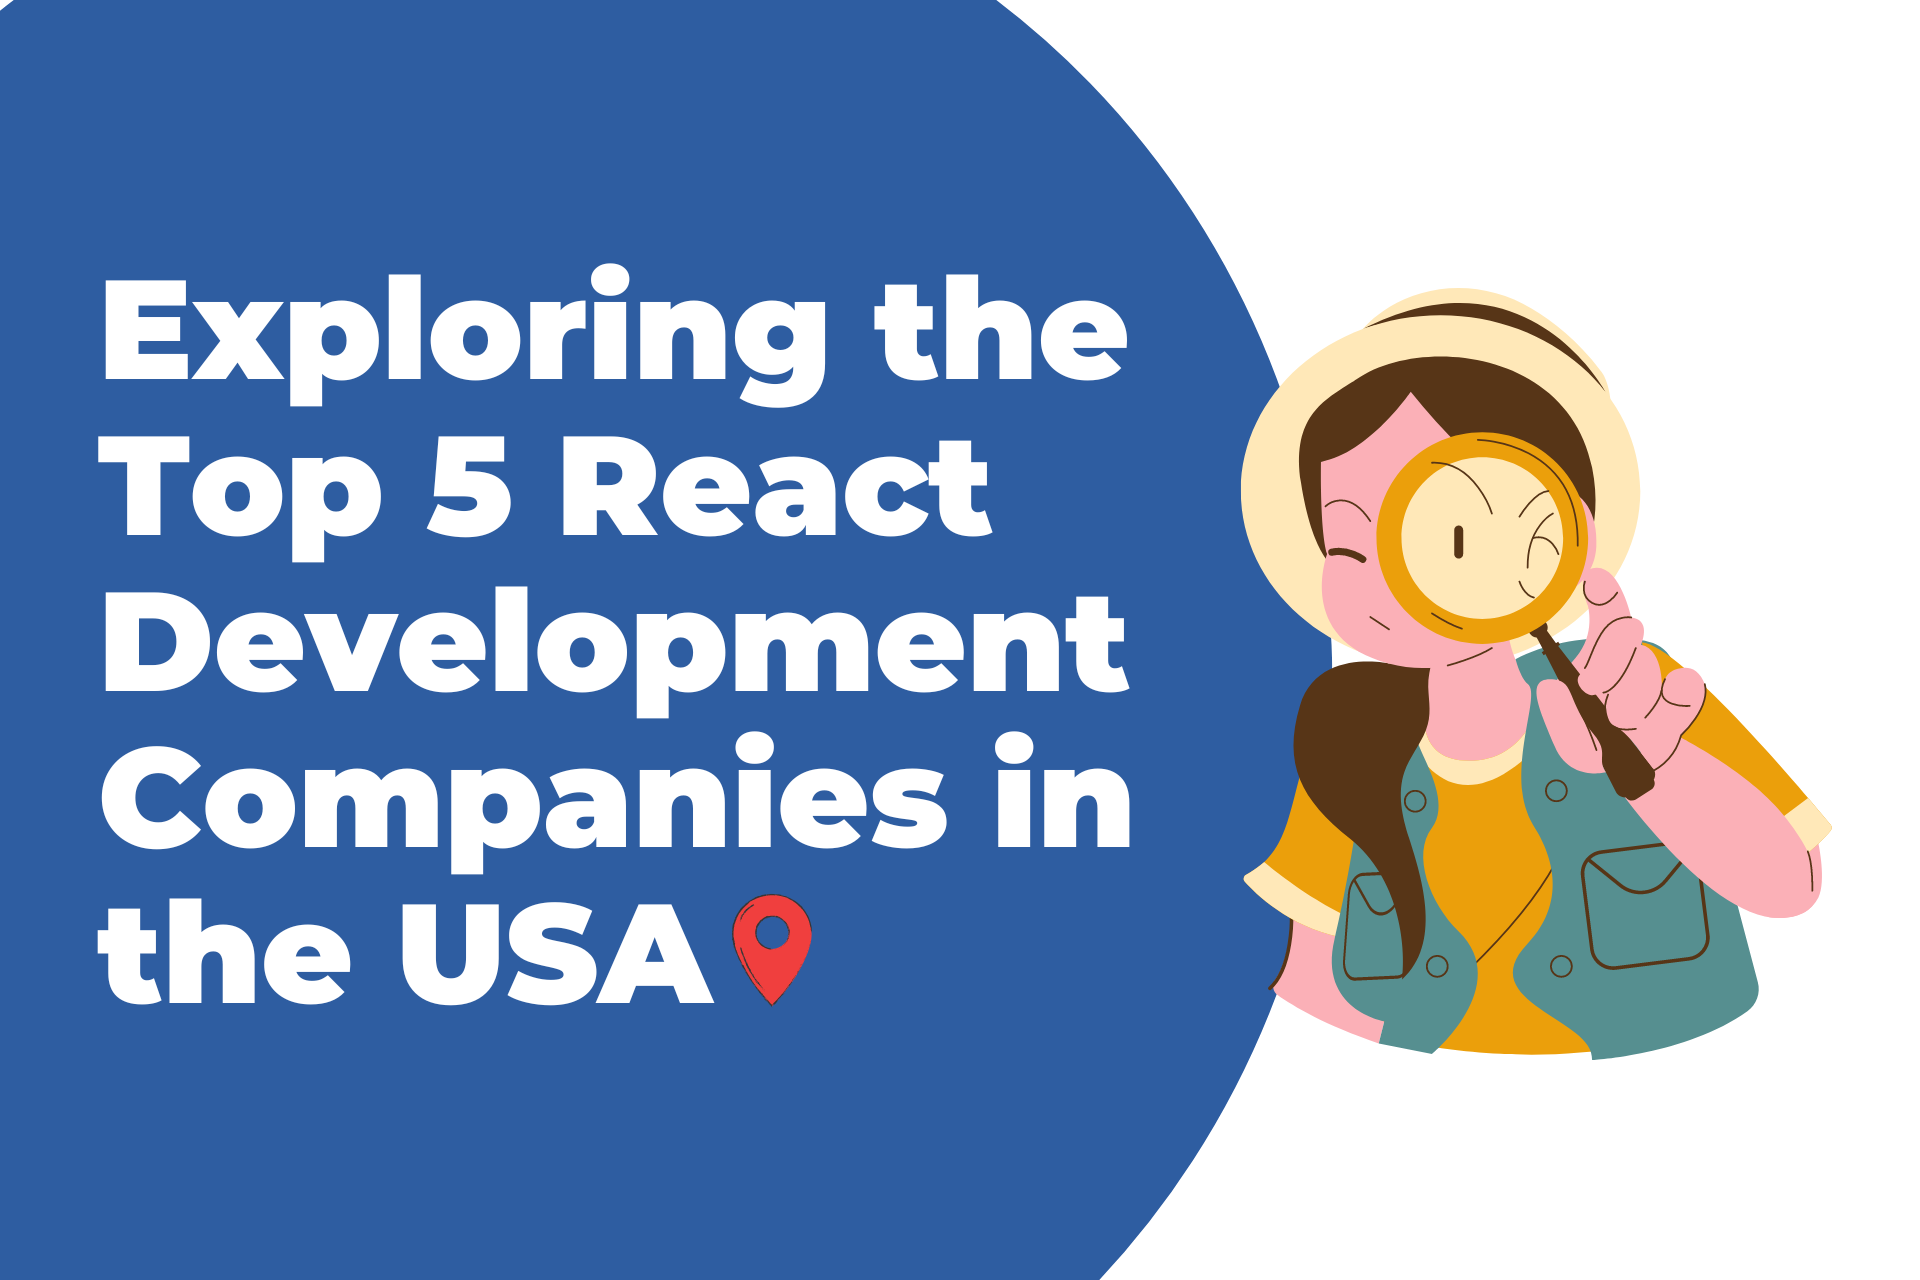 Exploring the Top 5 React Development Companies in the USA